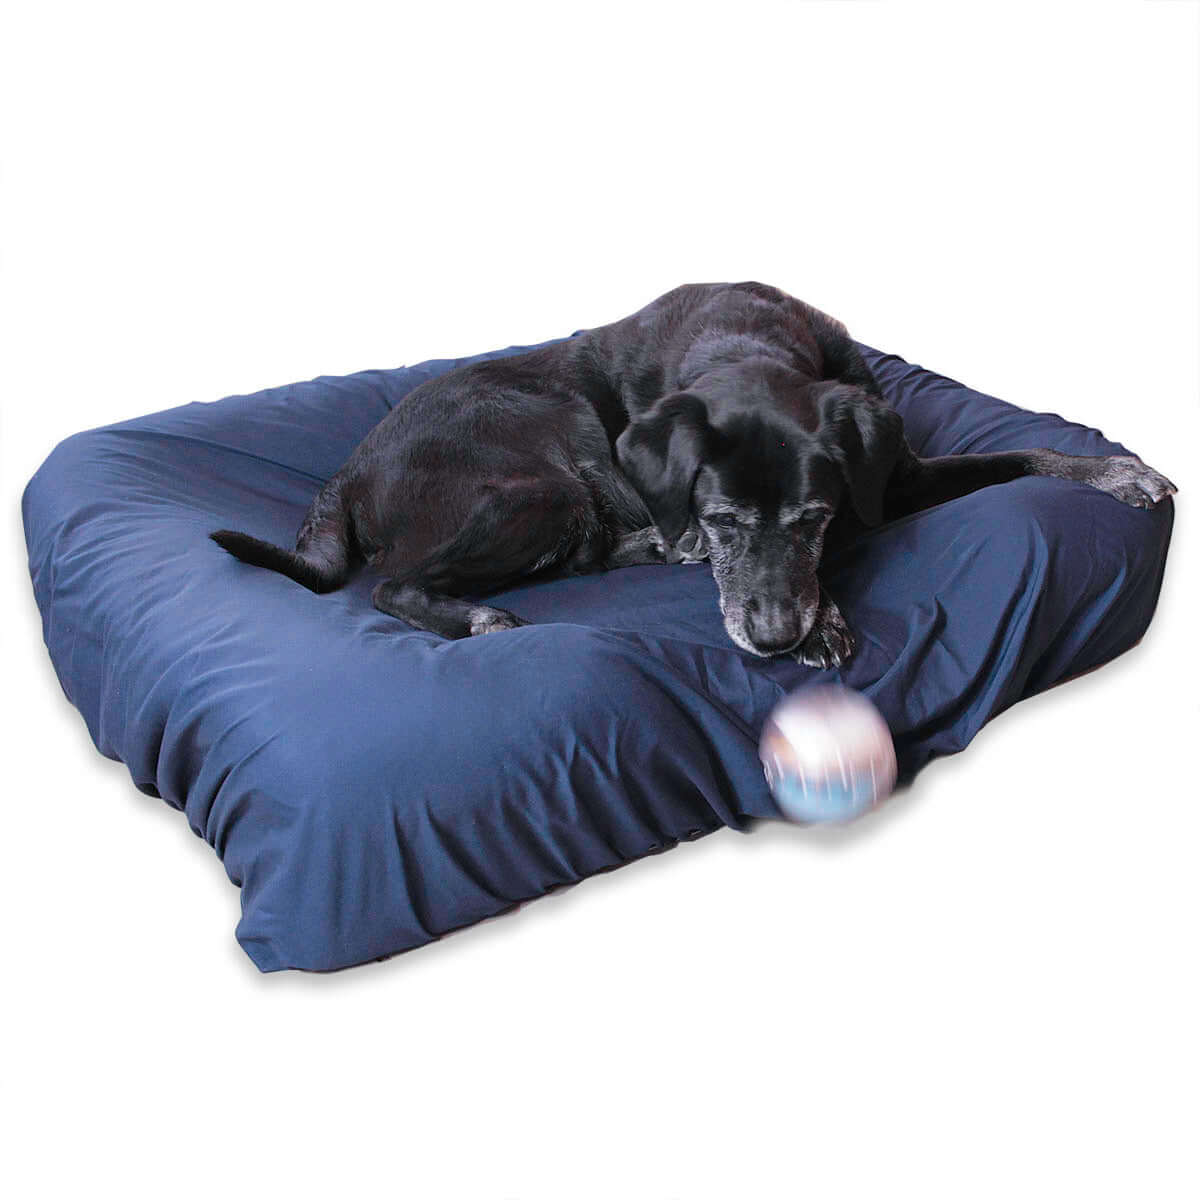 Navy Dog Bed Sheets on Large Pet Fusion Dog Bed